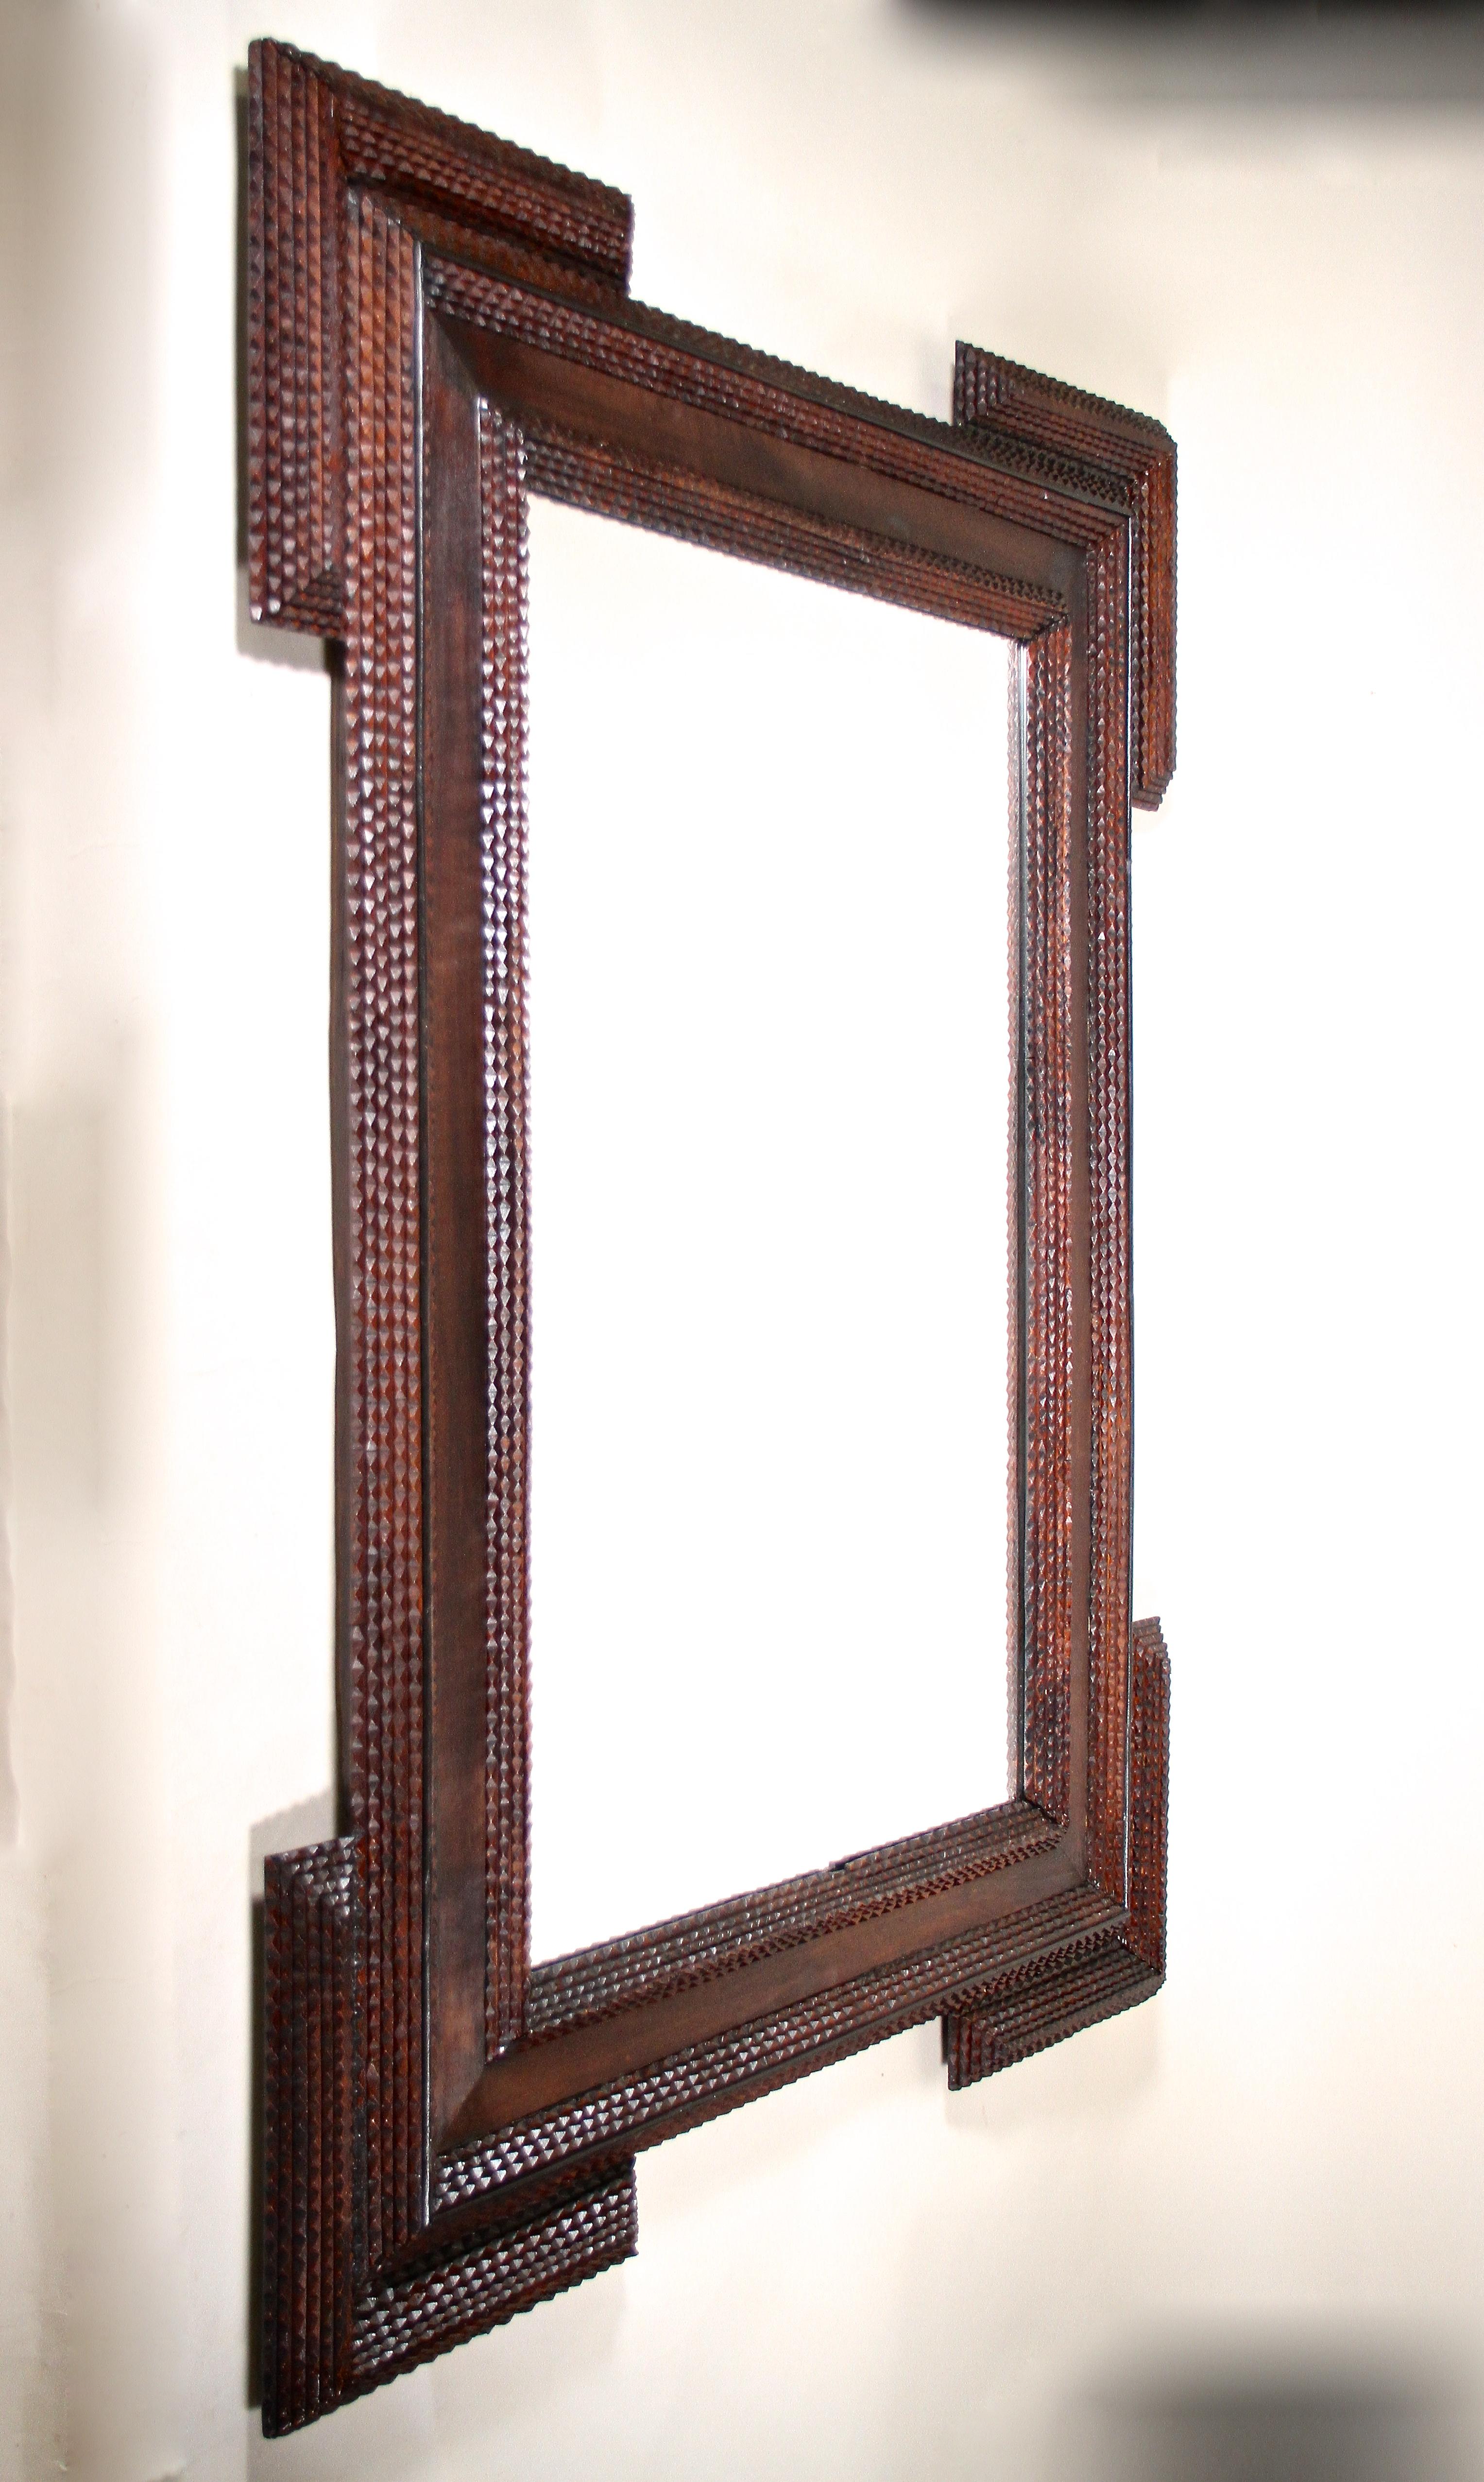 Stunning Rustic Tramp Art wall mirror out of Austria from the late 19th Century around 1880. This large hand carved mirror impresses with an unusually wide frame which is adorned by elaborately worked chip carvings. The protruding corners show a